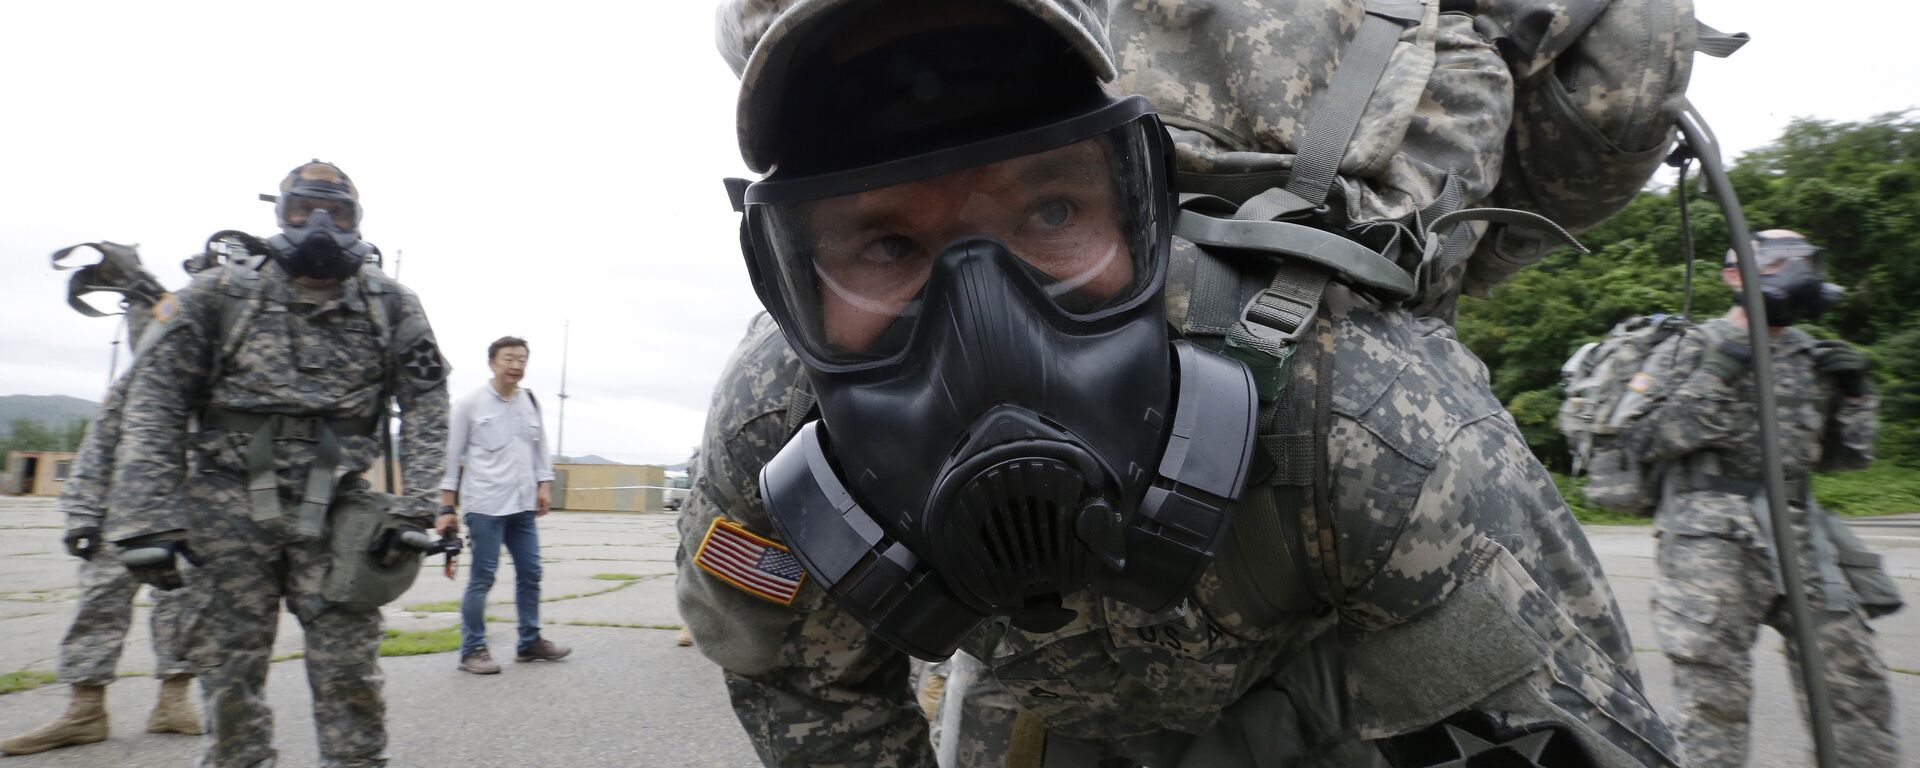 A soldiers of the U.S. Army 23rd chemical battalion wearing a gas mask rests after a competition at Camp Stanley in Uijeongbu, South Korea, Wednesday, July 8, 2015 - Sputnik International, 1920, 28.06.2019